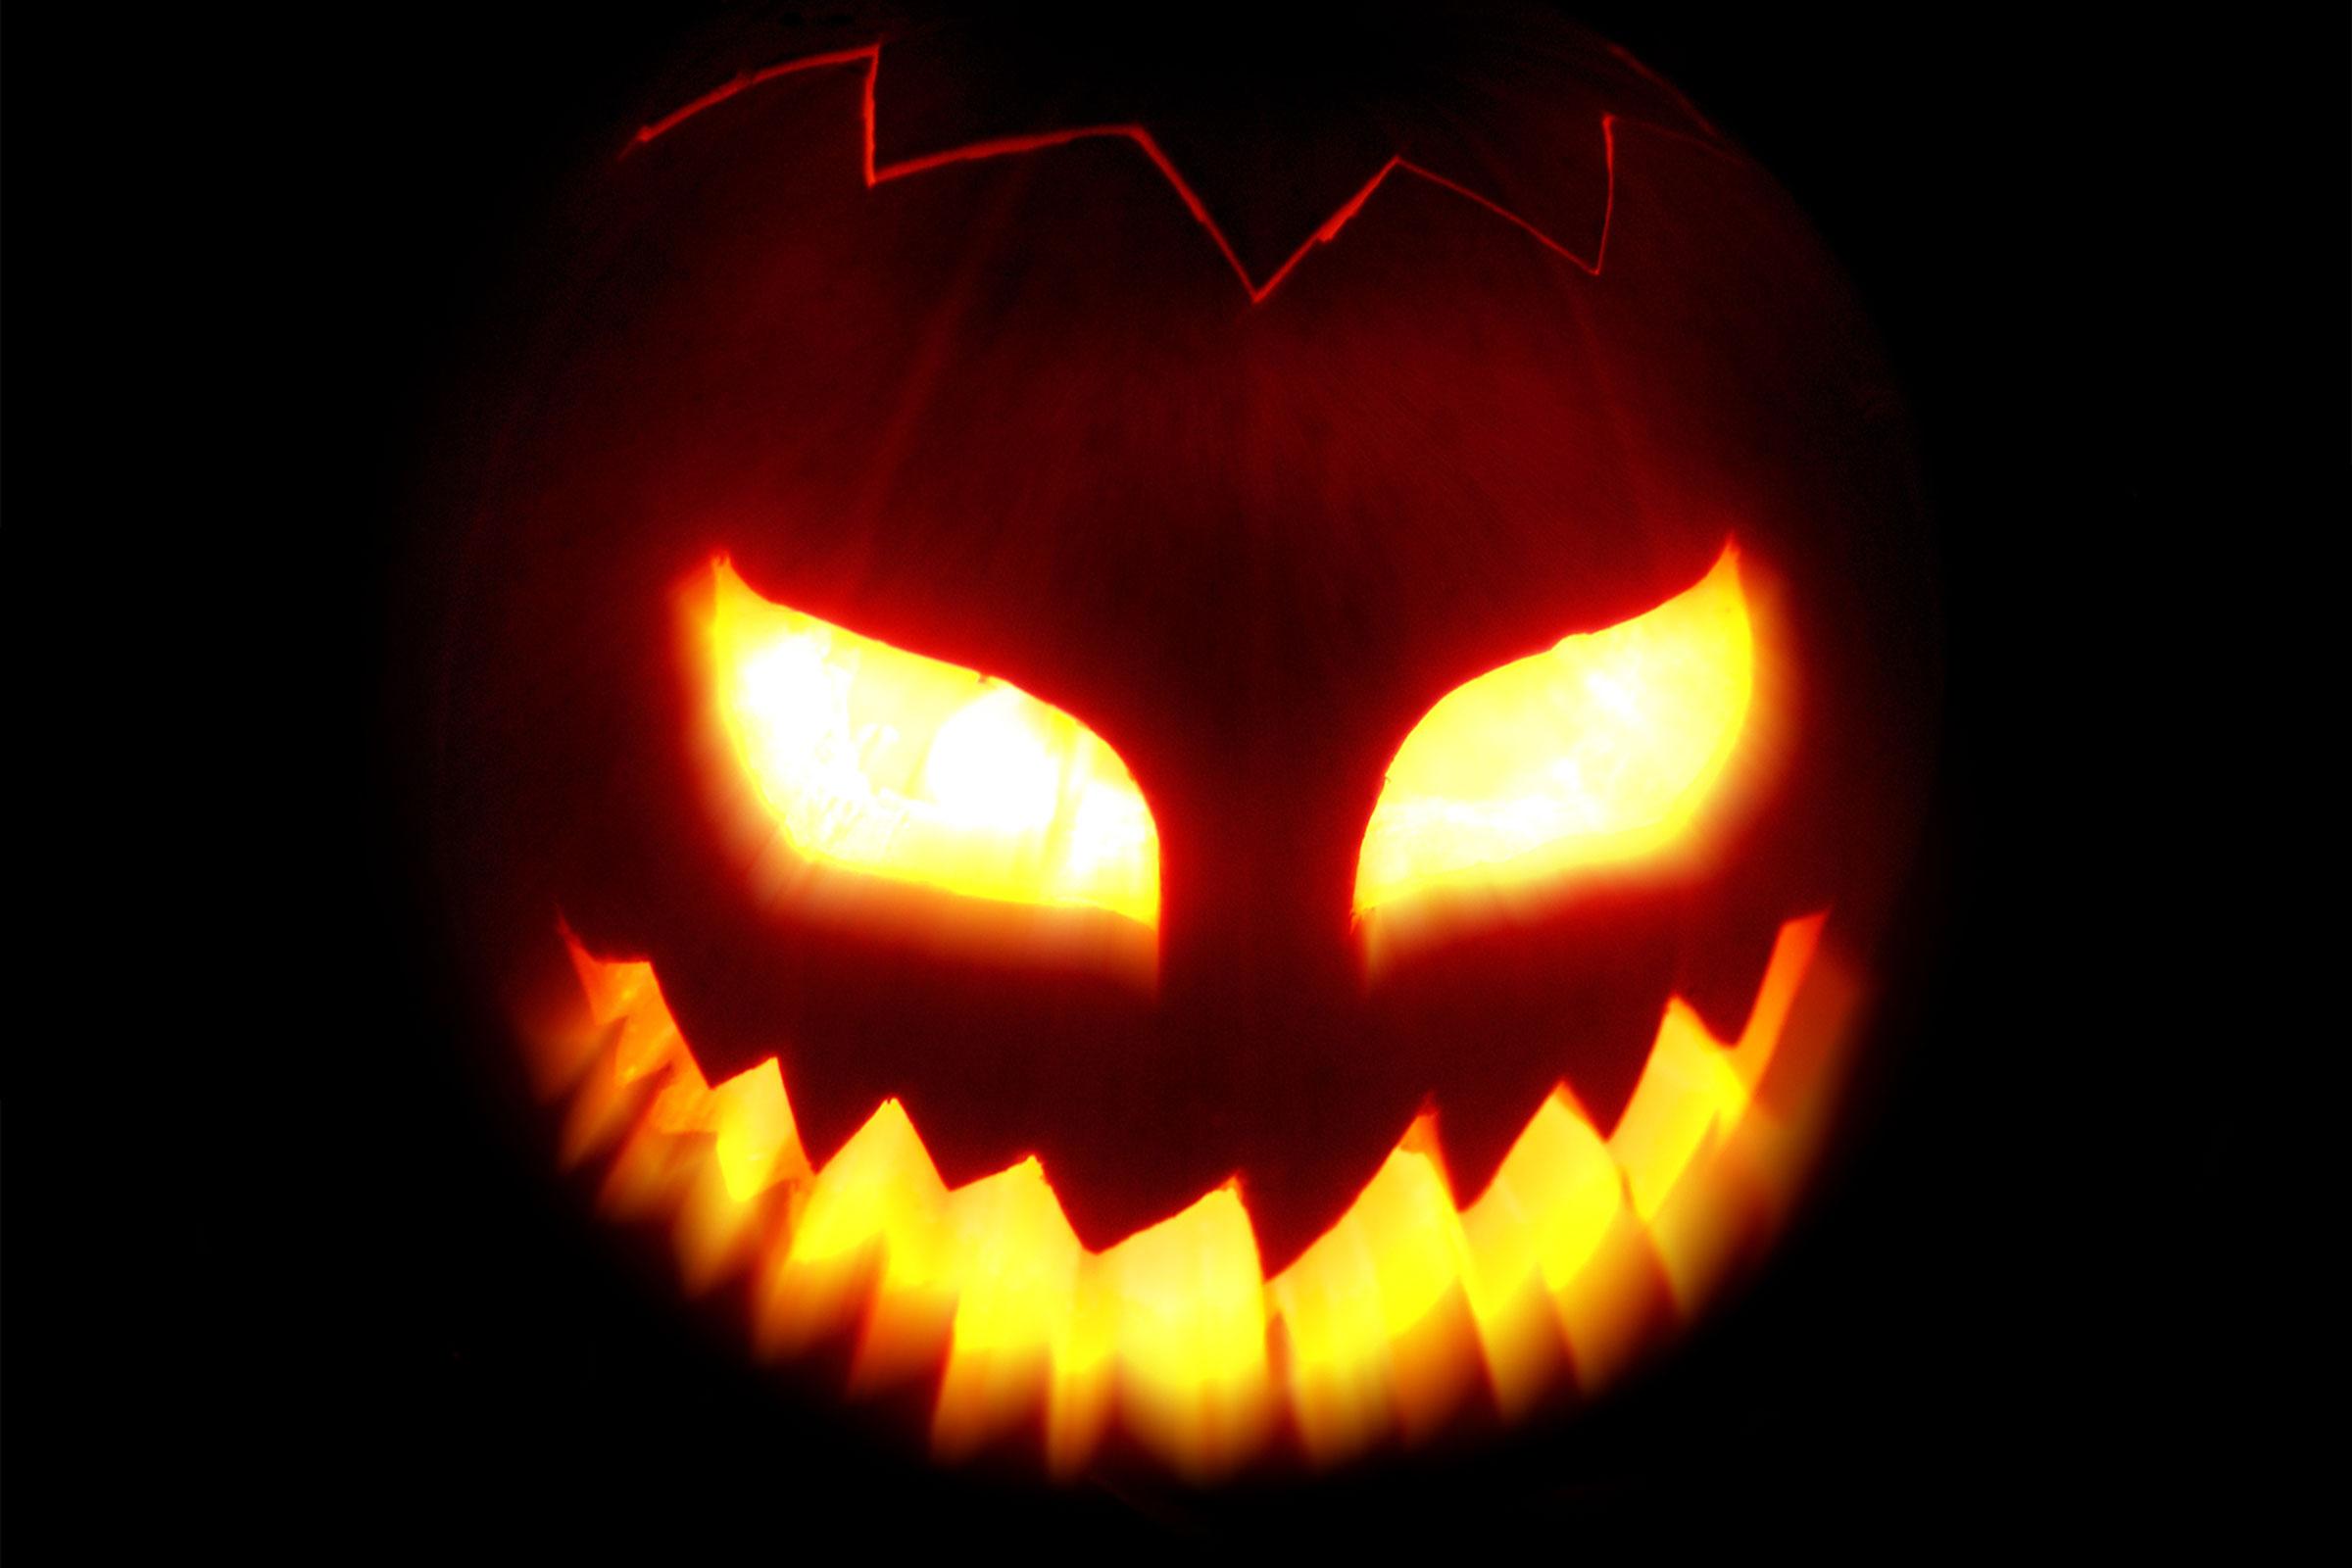 Scary Happy Halloween 2015 Image, Background, Wallpaper